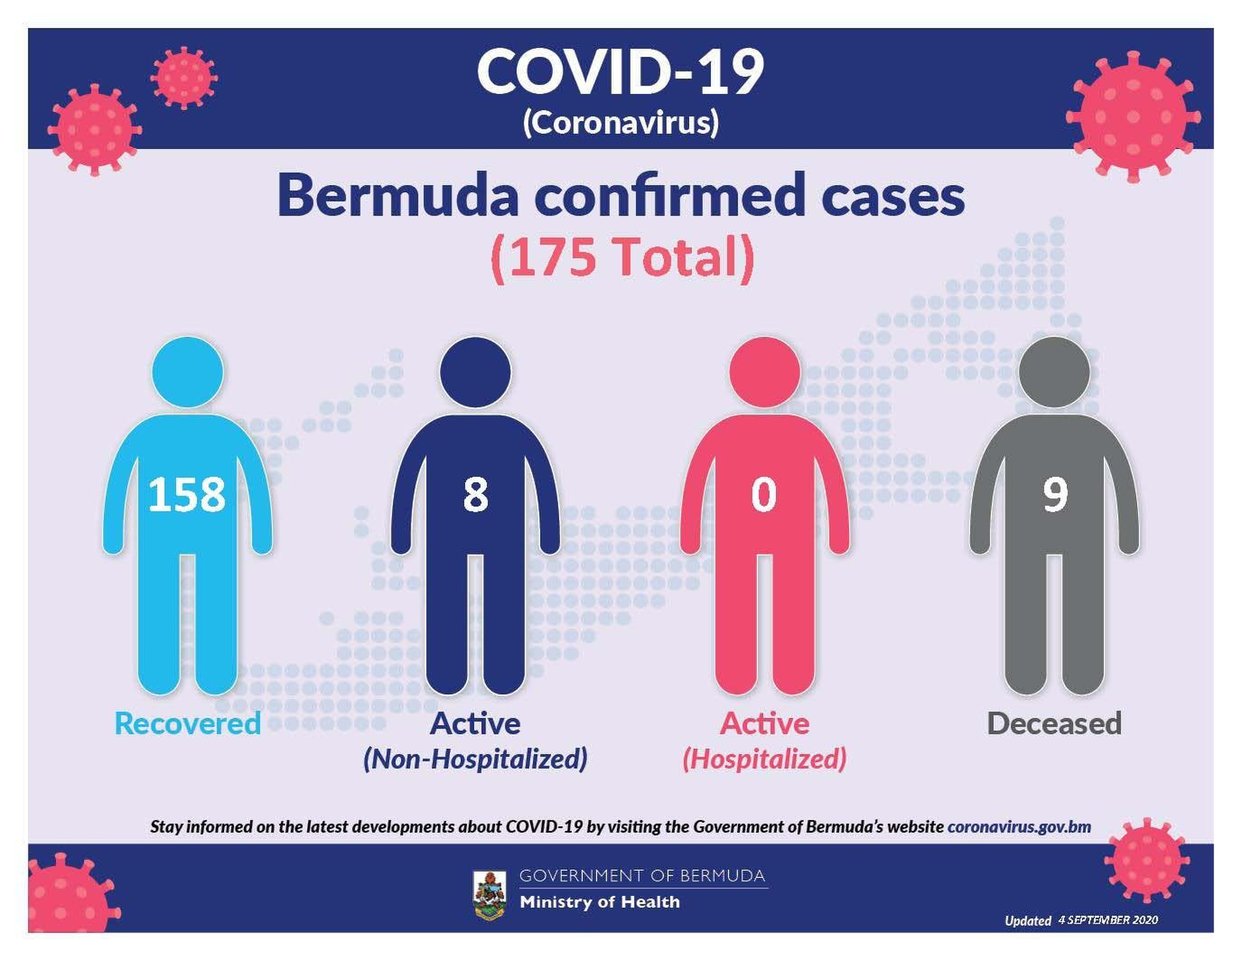 One new COVID-19 case reported in Bermuda, 4 September